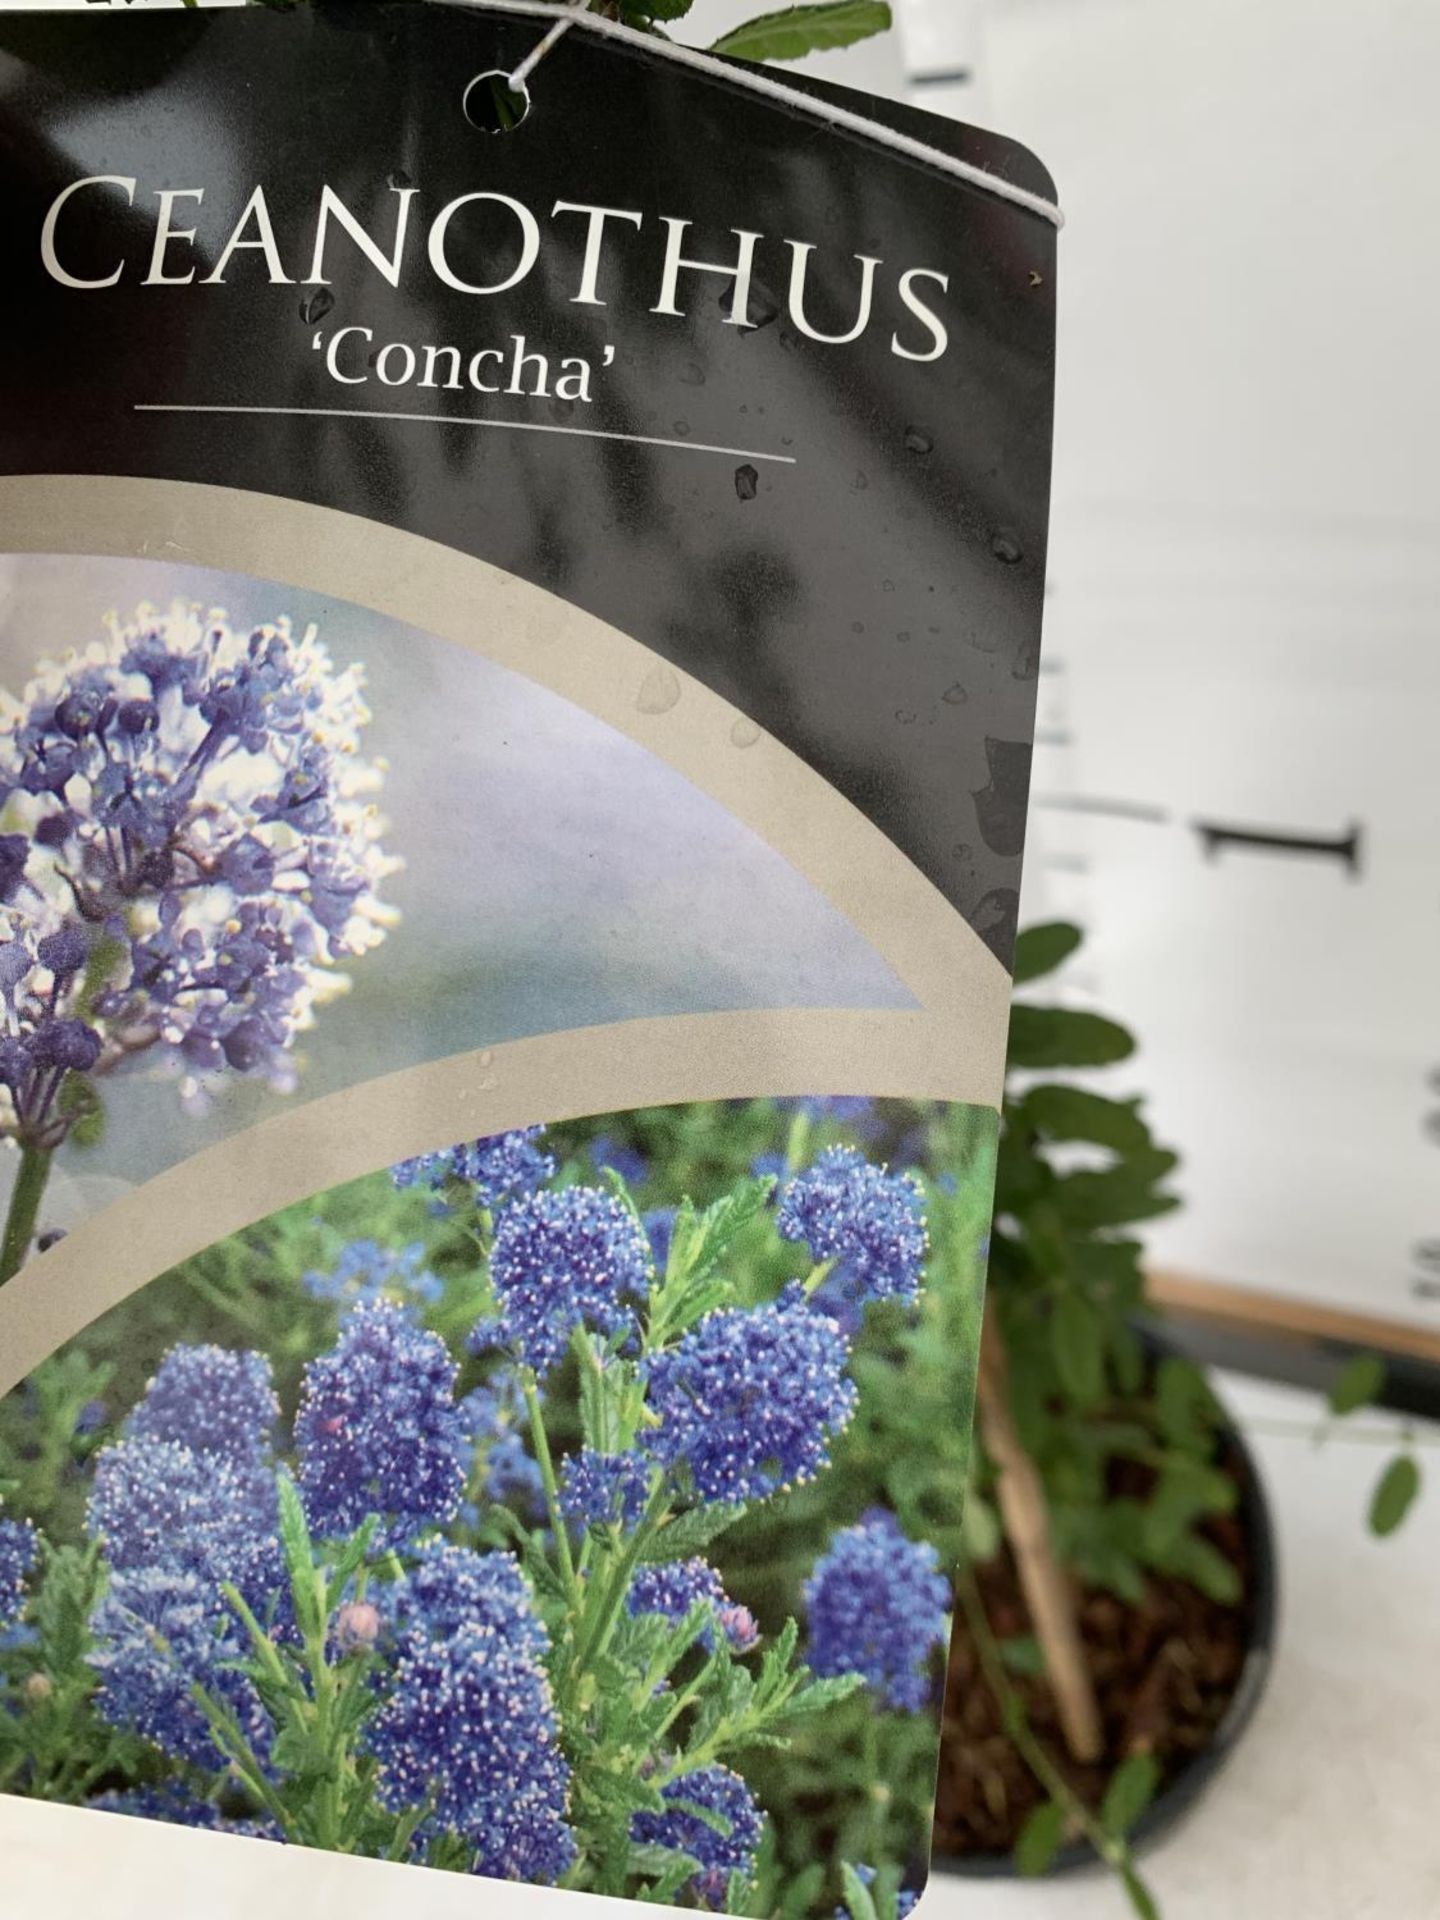 TWO CEANOTHUS CONCHA IN A 2 LTR POT ON A PYRAMID FRAME 80CM TALL PLUS VAT TO BE SOLD FOR THE TWO - Image 4 of 6